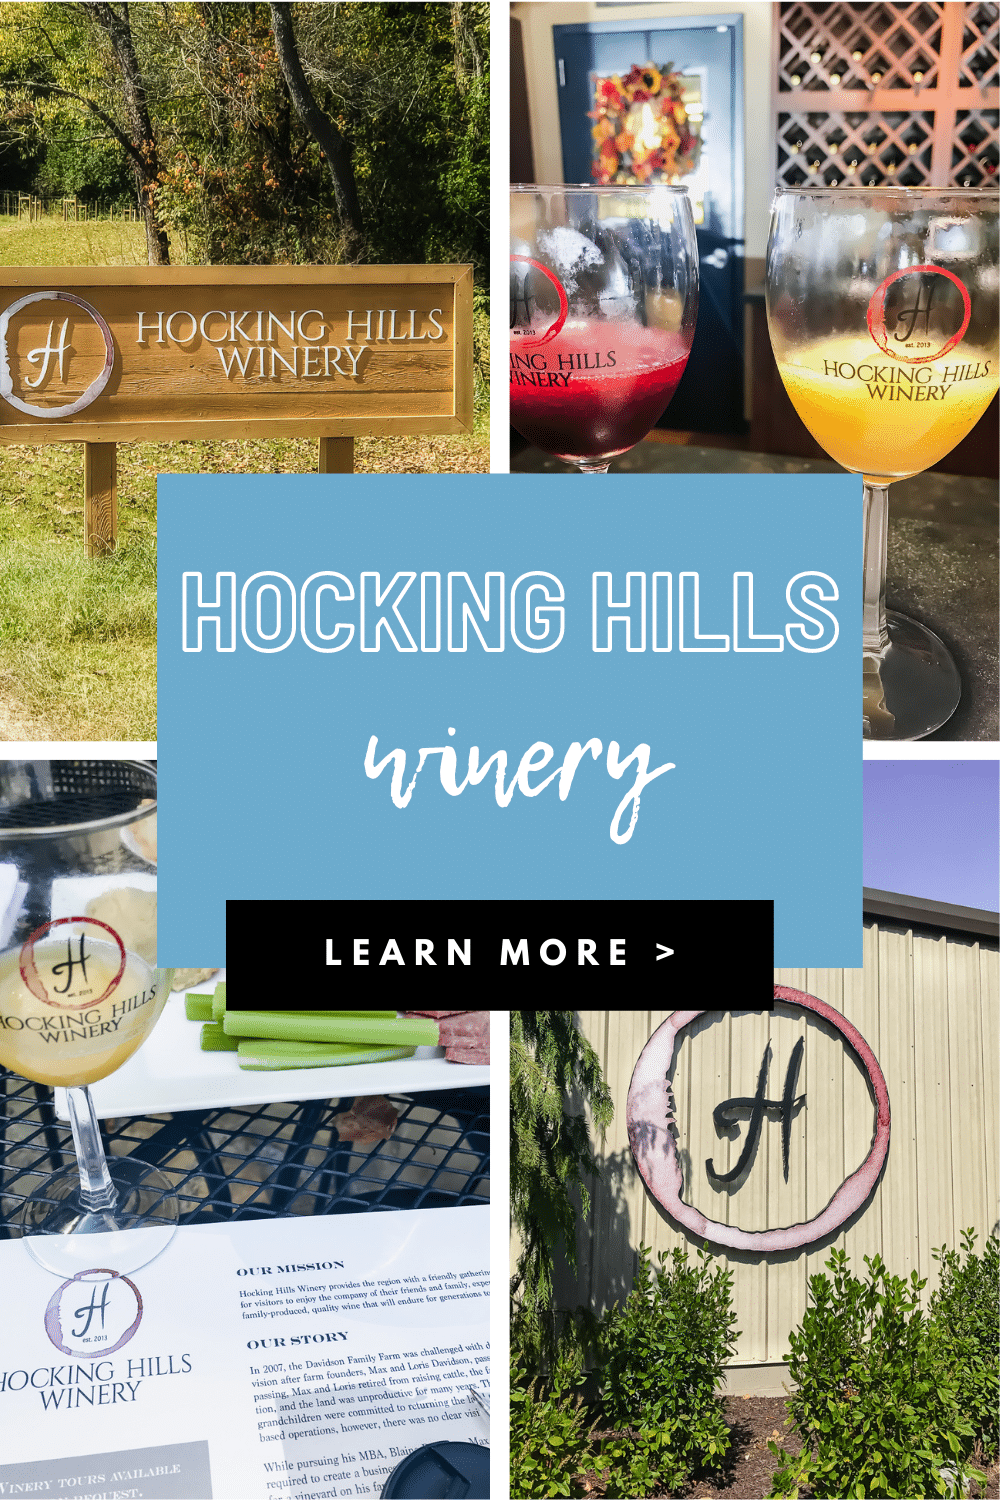 Hocking Hills Winery is a must visit destination when in the Hocking Hills, Ohio area. This family owned and run winery, offers up red and white wine, wine slushies and more! #hockinghills #ohio